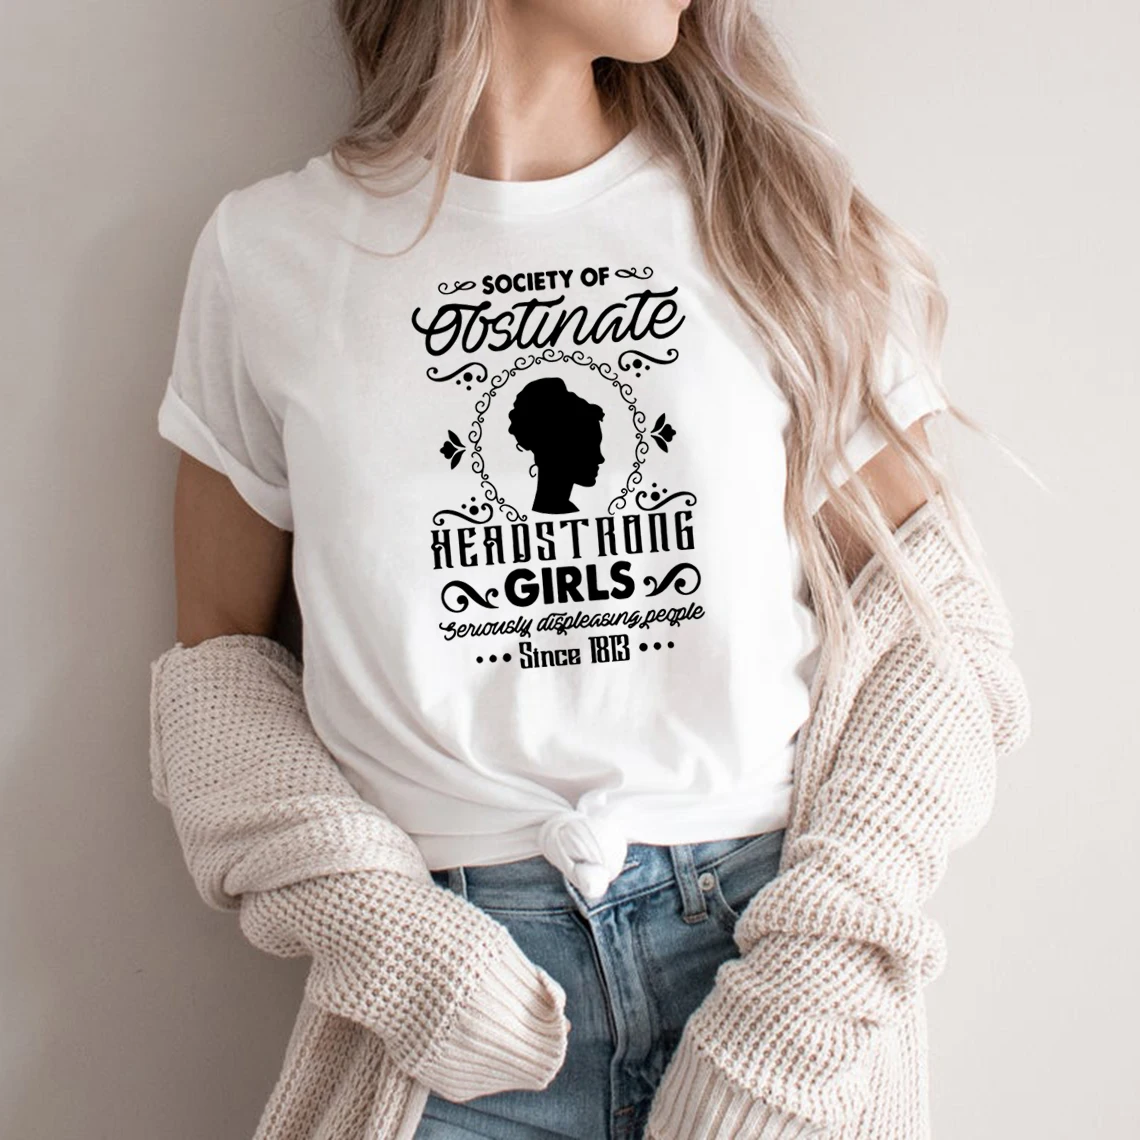 Society of Obstinate Headstrong Girls T-shirt Jane Austen Shirt Pride and Prejudice Tshirts Bookish Tees Feminist T Shirts Tops